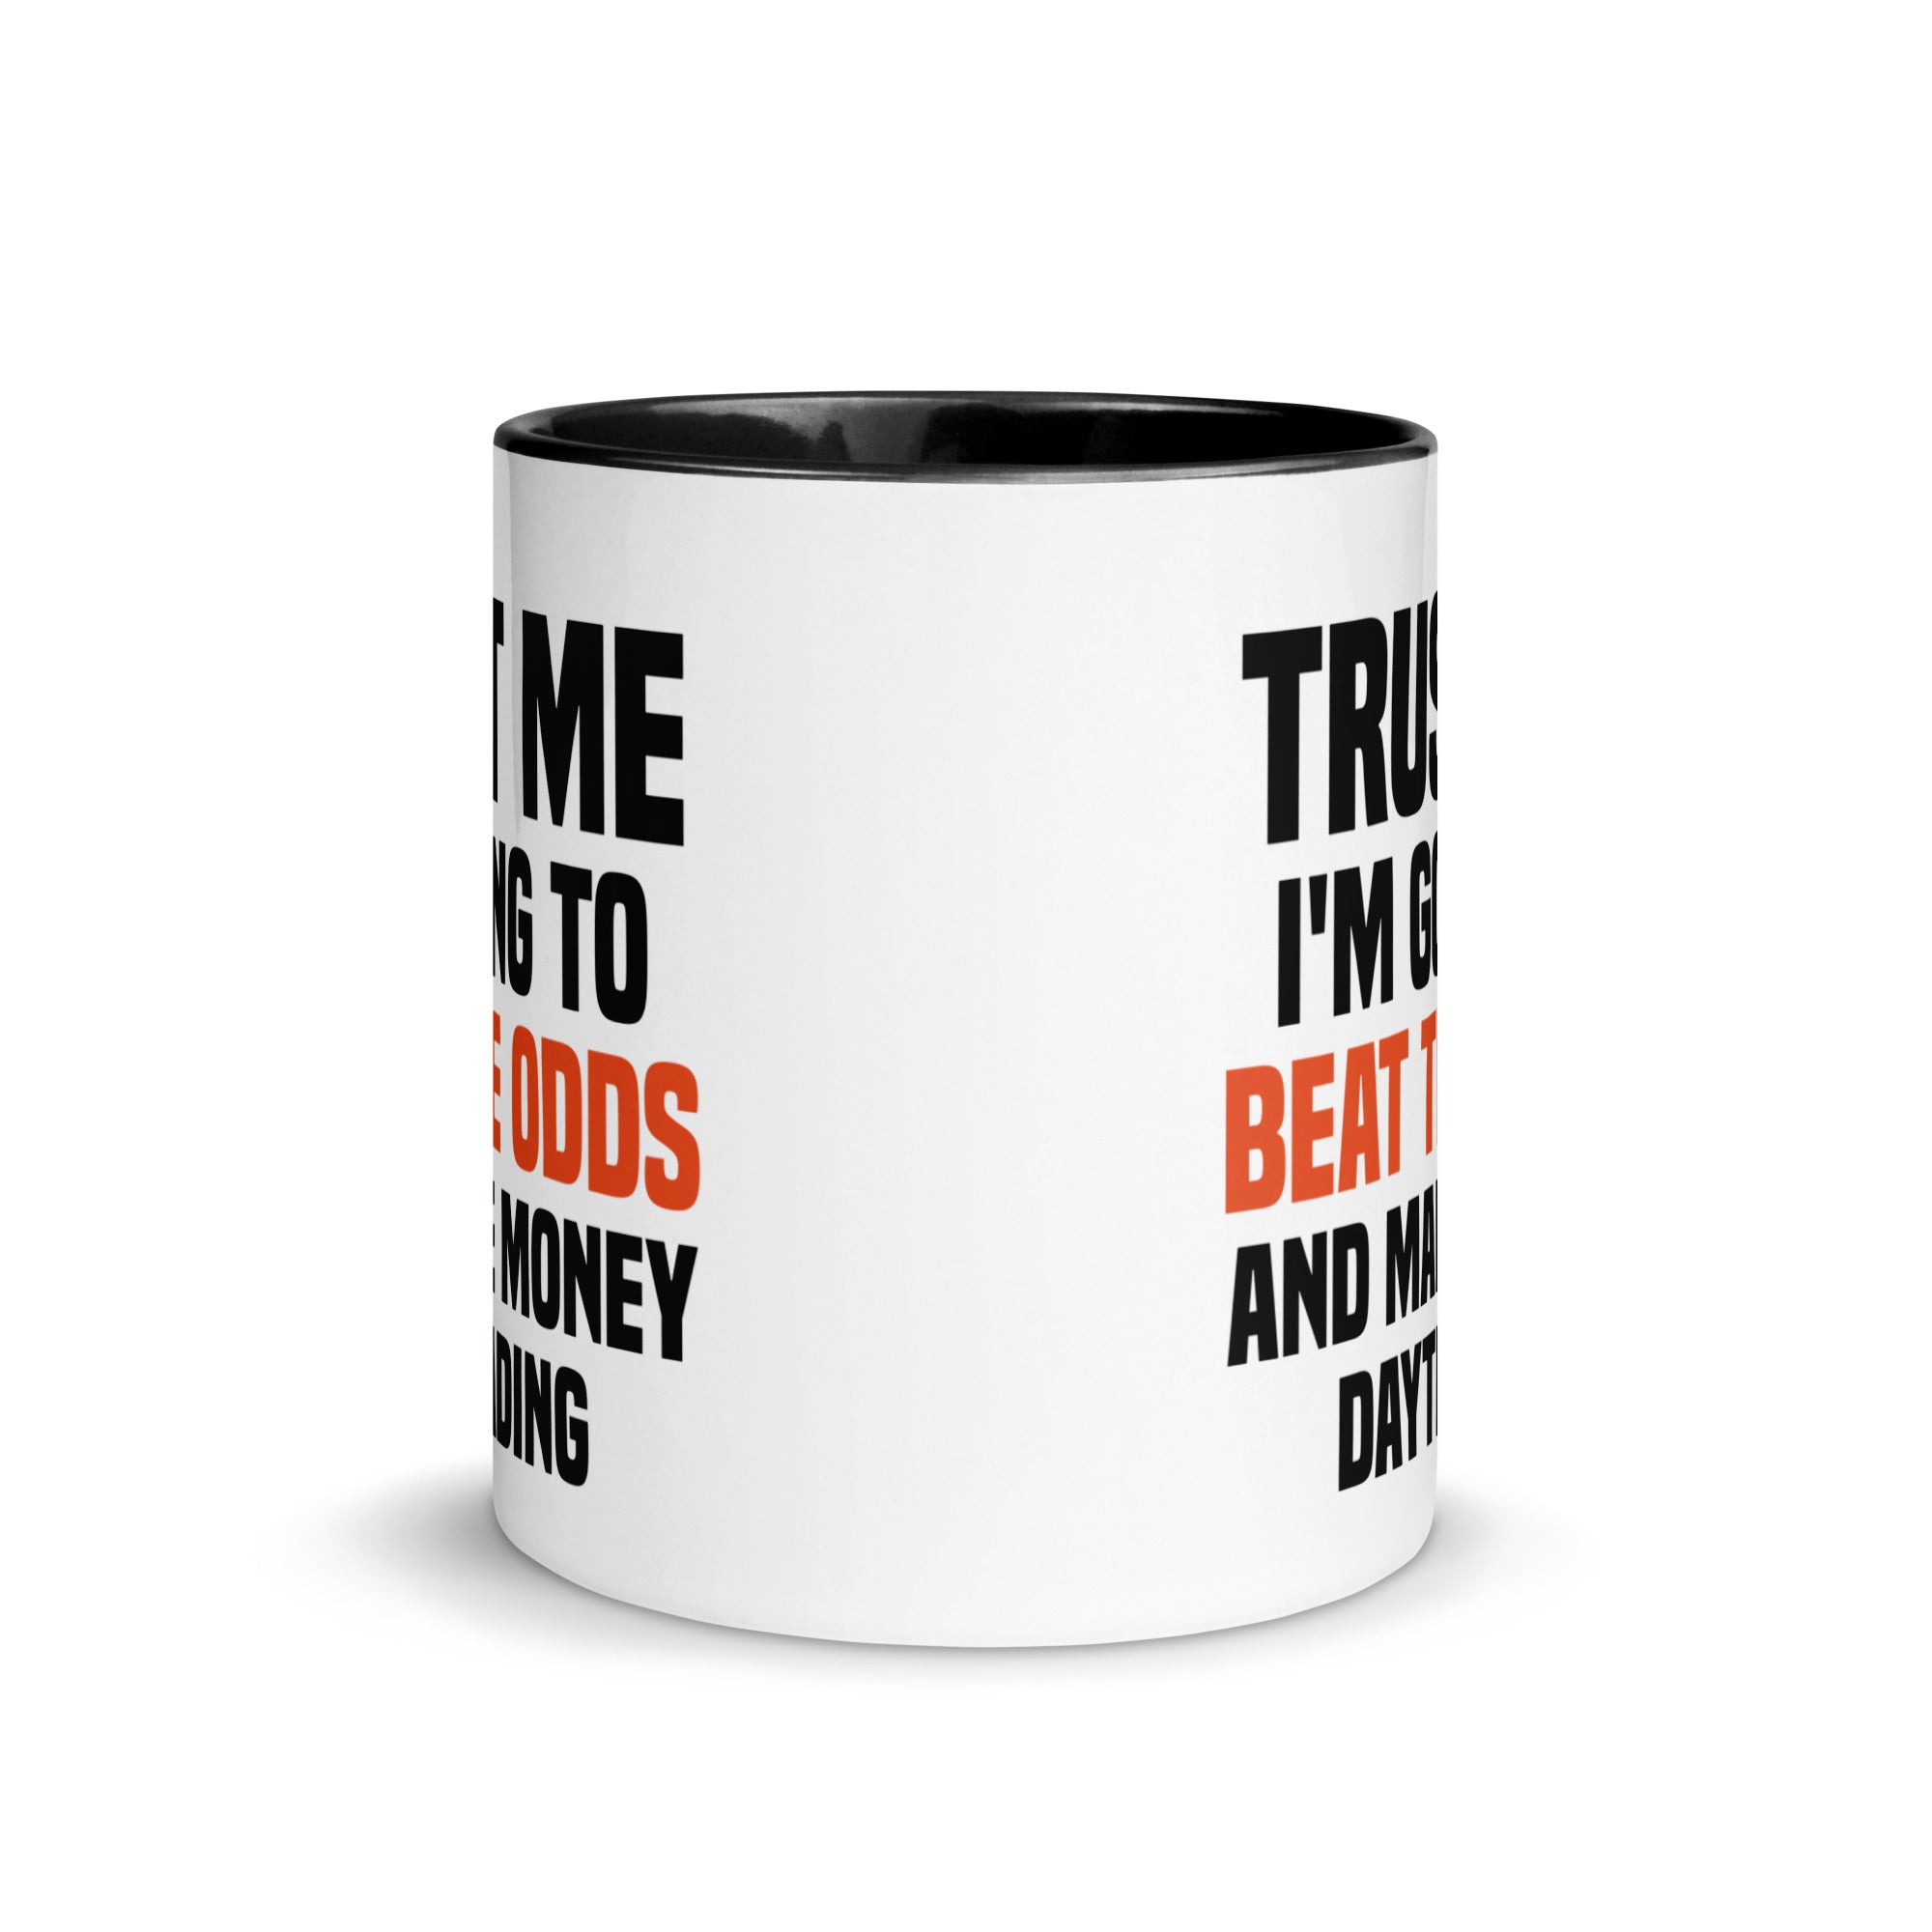 Mug with Color Inside | Trust me I am going to beat the odds and make money daytrading